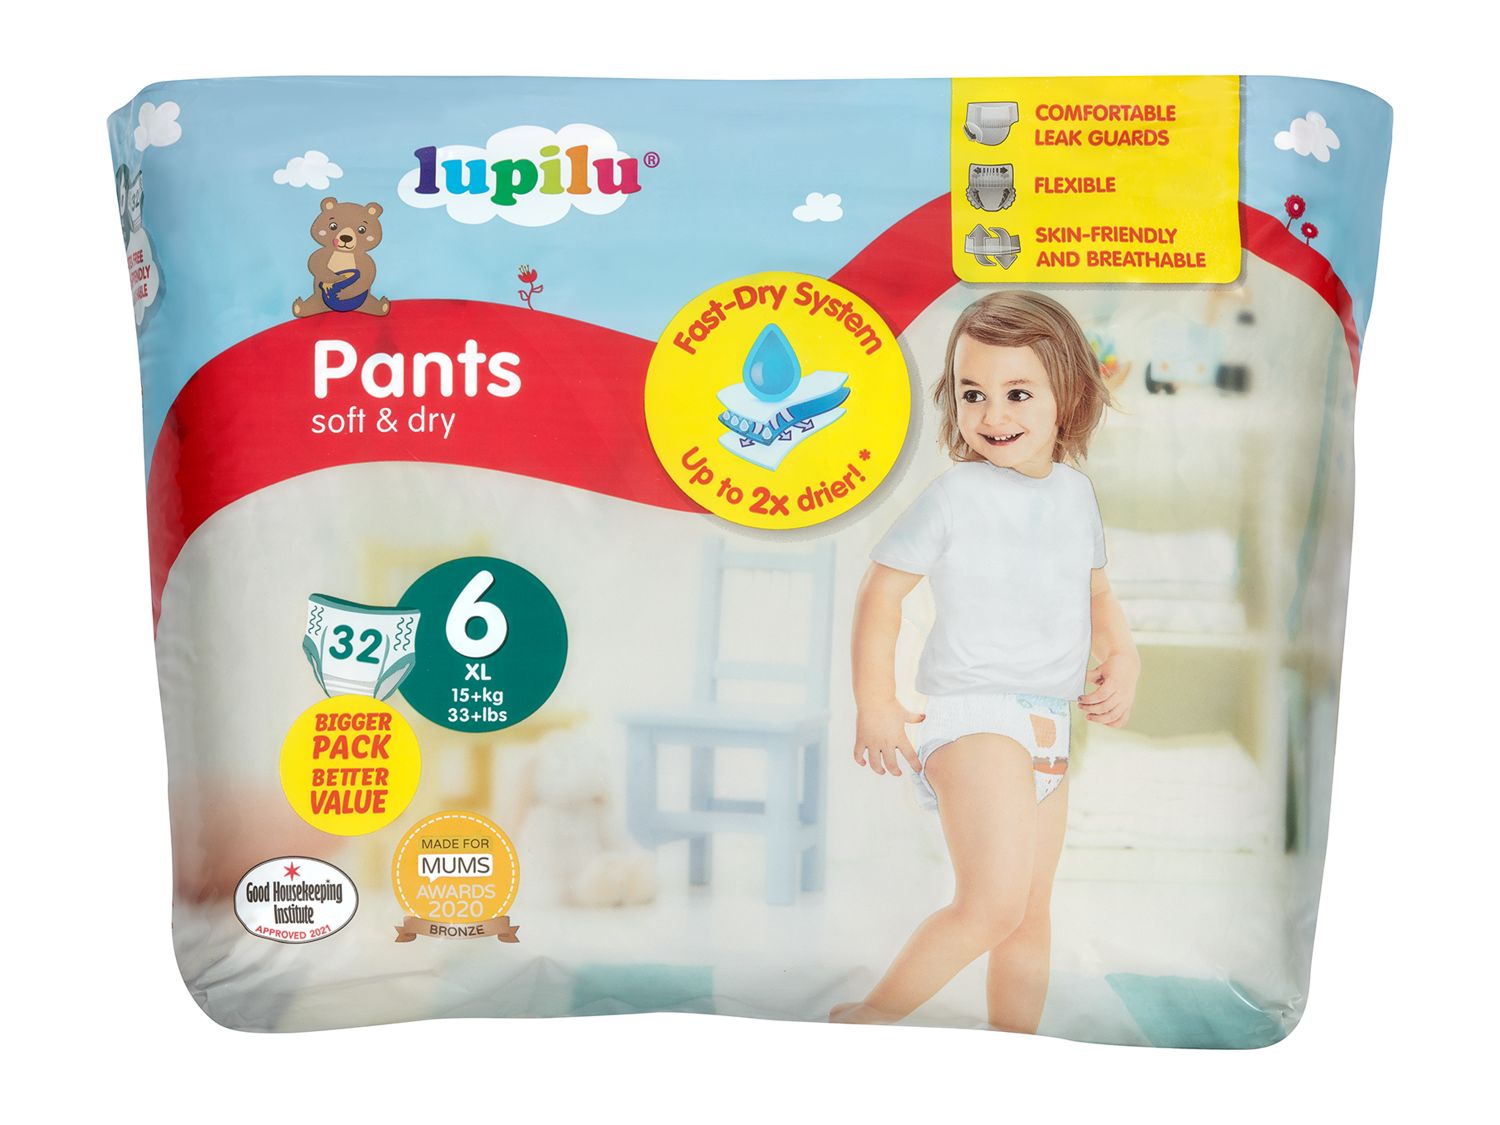 pampers pants czym sapokryte